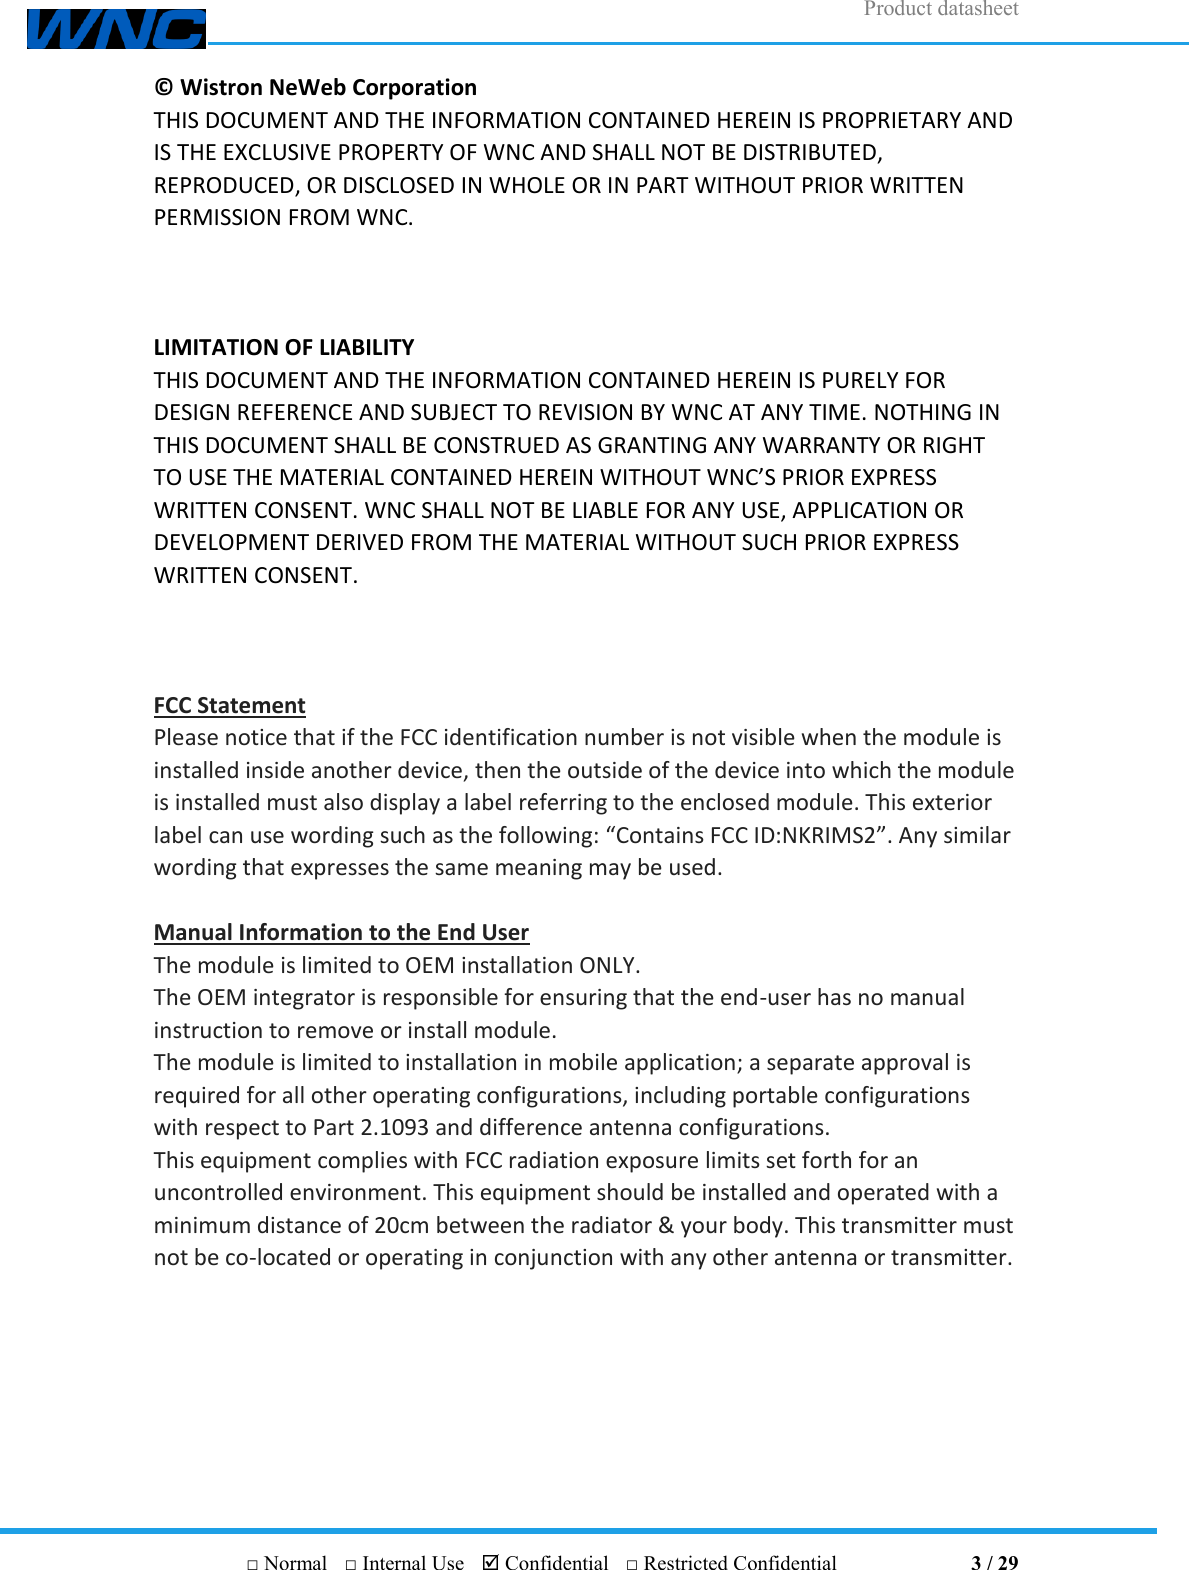 Product datasheet       □ Normal  □ Internal Use   Confidential  □ Restricted Confidential                                3 / 29 ©  Wistron NeWeb Corporation THIS DOCUMENT AND THE INFORMATION CONTAINED HEREIN IS PROPRIETARY AND IS THE EXCLUSIVE PROPERTY OF WNC AND SHALL NOT BE DISTRIBUTED, REPRODUCED, OR DISCLOSED IN WHOLE OR IN PART WITHOUT PRIOR WRITTEN PERMISSION FROM WNC.    LIMITATION OF LIABILITY THIS DOCUMENT AND THE INFORMATION CONTAINED HEREIN IS PURELY FOR DESIGN REFERENCE AND SUBJECT TO REVISION BY WNC AT ANY TIME. NOTHING IN THIS DOCUMENT SHALL BE CONSTRUED AS GRANTING ANY WARRANTY OR RIGHT TO USE THE MATERIAL CONTAINED HEREIN WITHOUT WNC’S PRIOR EXPRESS WRITTEN CONSENT. WNC SHALL NOT BE LIABLE FOR ANY USE, APPLICATION OR DEVELOPMENT DERIVED FROM THE MATERIAL WITHOUT SUCH PRIOR EXPRESS WRITTEN CONSENT.    FCC Statement Please notice that if the FCC identification number is not visible when the module is installed inside another device, then the outside of the device into which the module is installed must also display a label referring to the enclosed module. This exterior label can use wording such as the following: “Contains FCC ID:NKRIMS2”. Any similar wording that expresses the same meaning may be used.  Manual Information to the End User The module is limited to OEM installation ONLY. The OEM integrator is responsible for ensuring that the end-user has no manual instruction to remove or install module. The module is limited to installation in mobile application; a separate approval is required for all other operating configurations, including portable configurations with respect to Part 2.1093 and difference antenna configurations. This equipment complies with FCC radiation exposure limits set forth for an uncontrolled environment. This equipment should be installed and operated with a minimum distance of 20cm between the radiator &amp; your body. This transmitter must not be co-located or operating in conjunction with any other antenna or transmitter. 